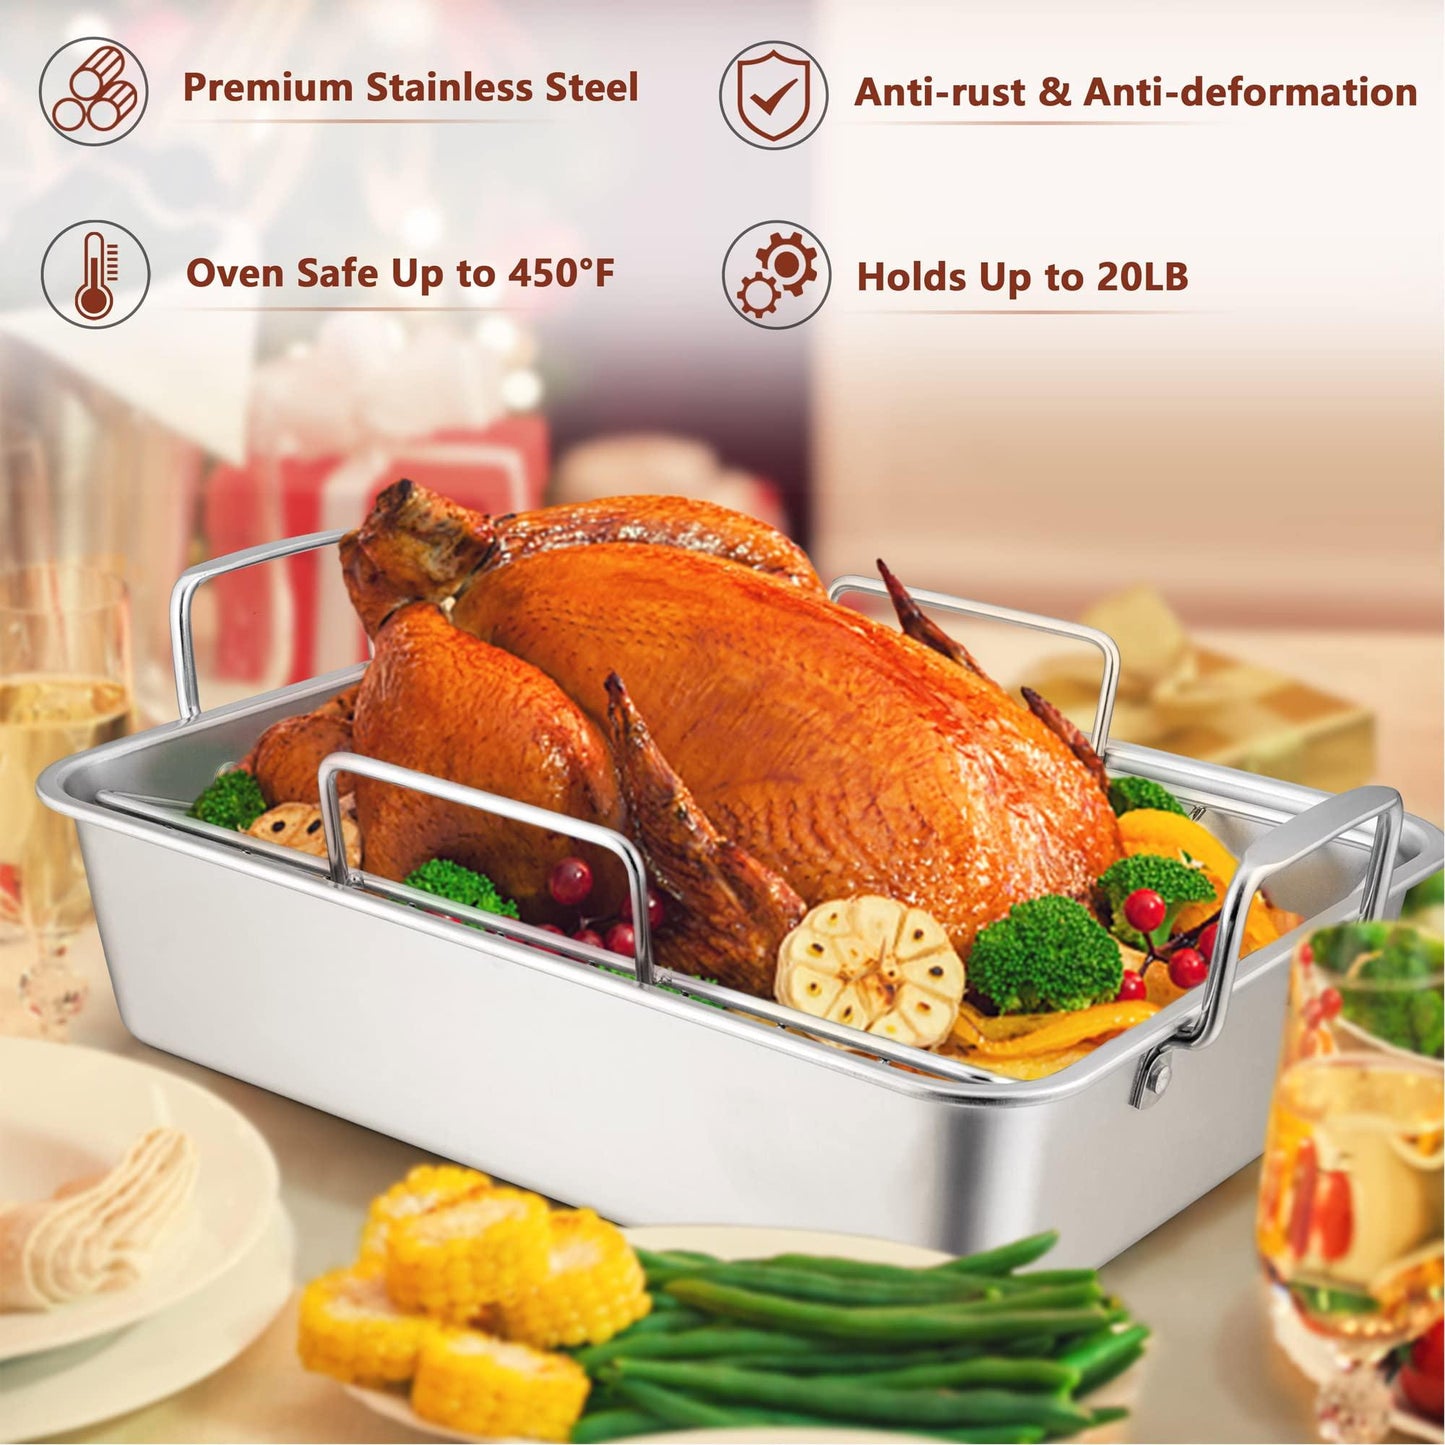 LIANYU Roasting Pan with Rack, 15 Inch Stainless Steel Turkey Roaster Pan with V-Shaped Rack and Baking Rack, Heavy Duty Roaster Pot for Turkey, Chicken, Vegetable, Lasagna, Dishwasher Safe - CookCave